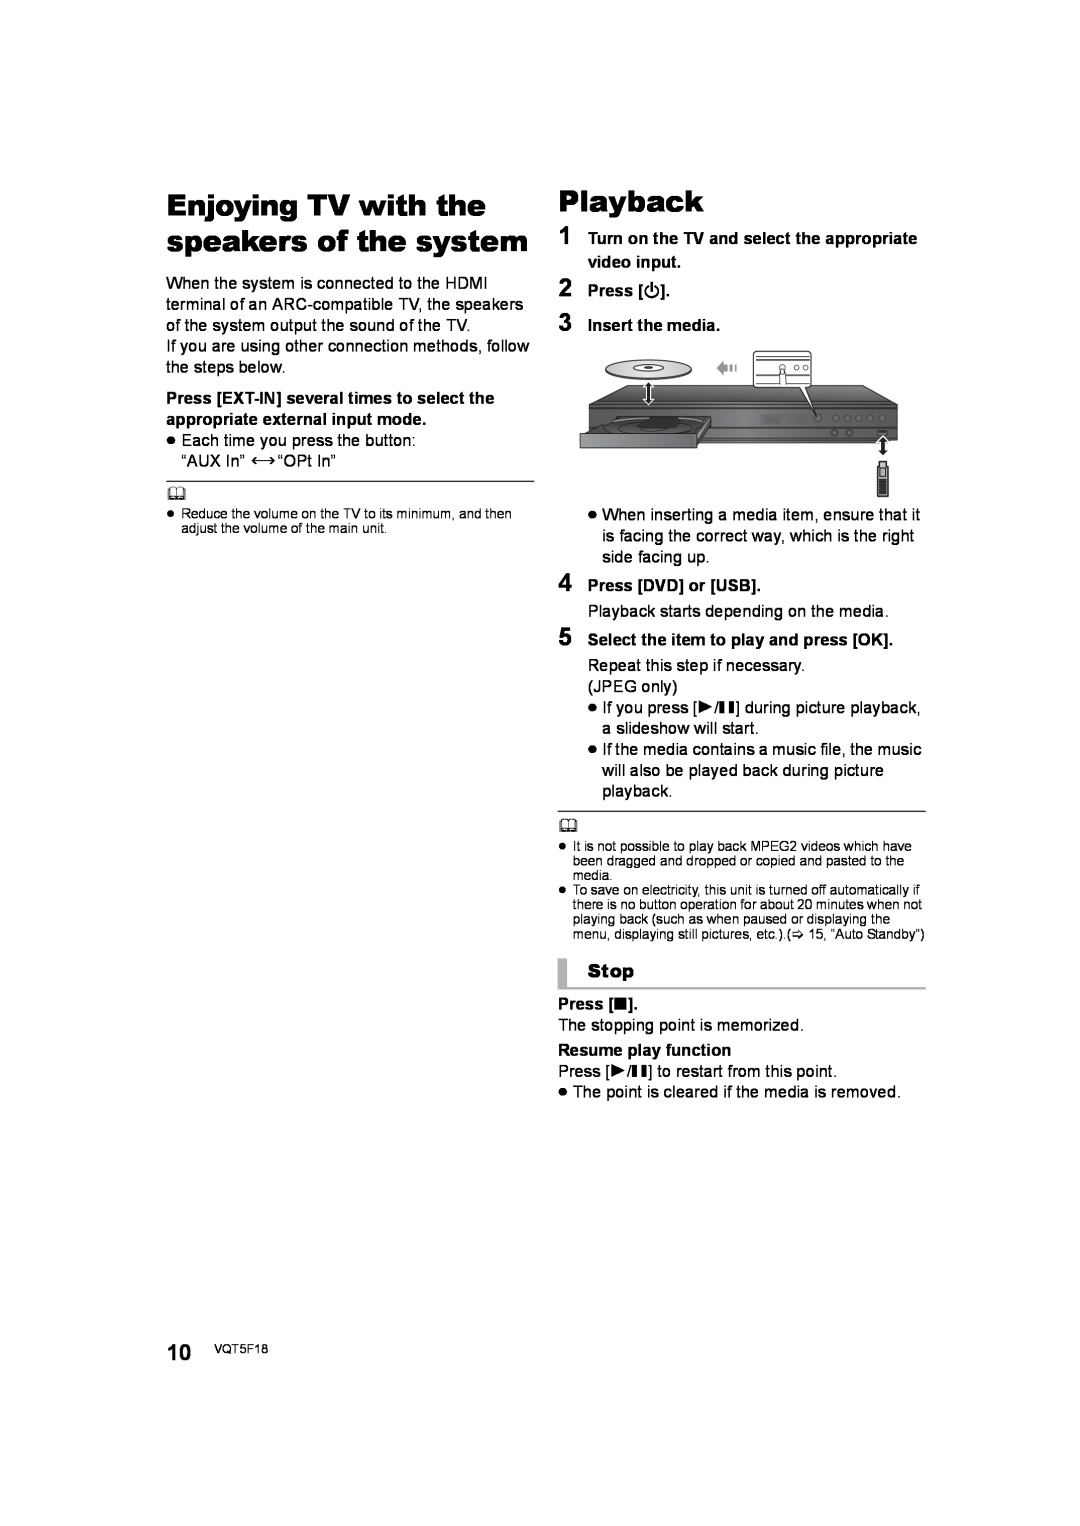 Panasonic SC-XH385, SC-XH333 owner manual Playback, Enjoying TV with the speakers of the system, Stop 